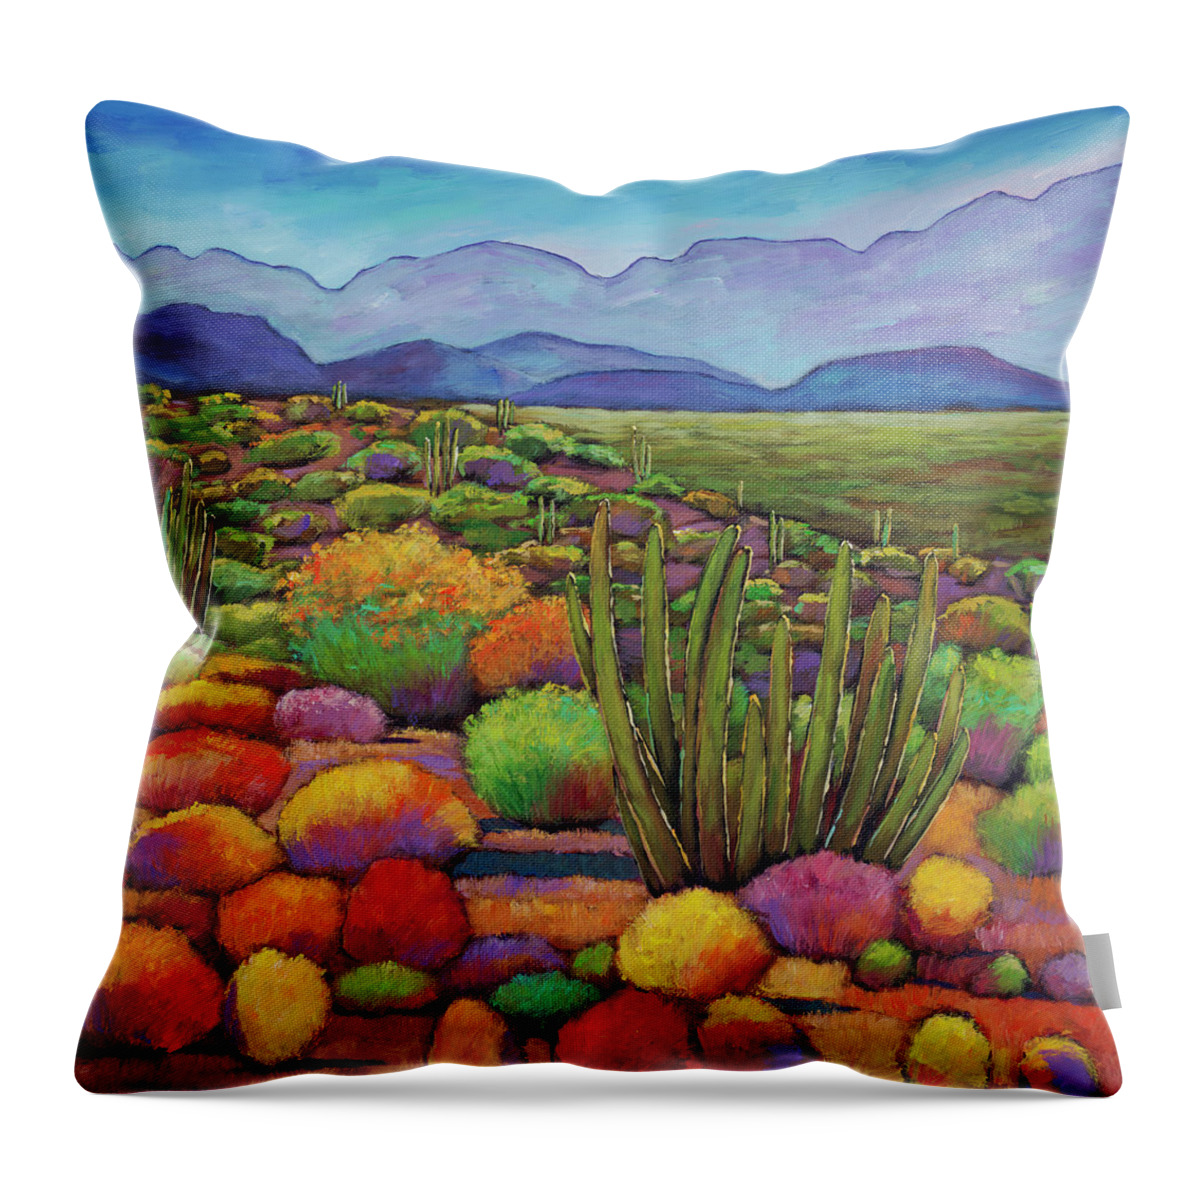 #faatoppicks Throw Pillow featuring the painting Organ Pipe by Johnathan Harris